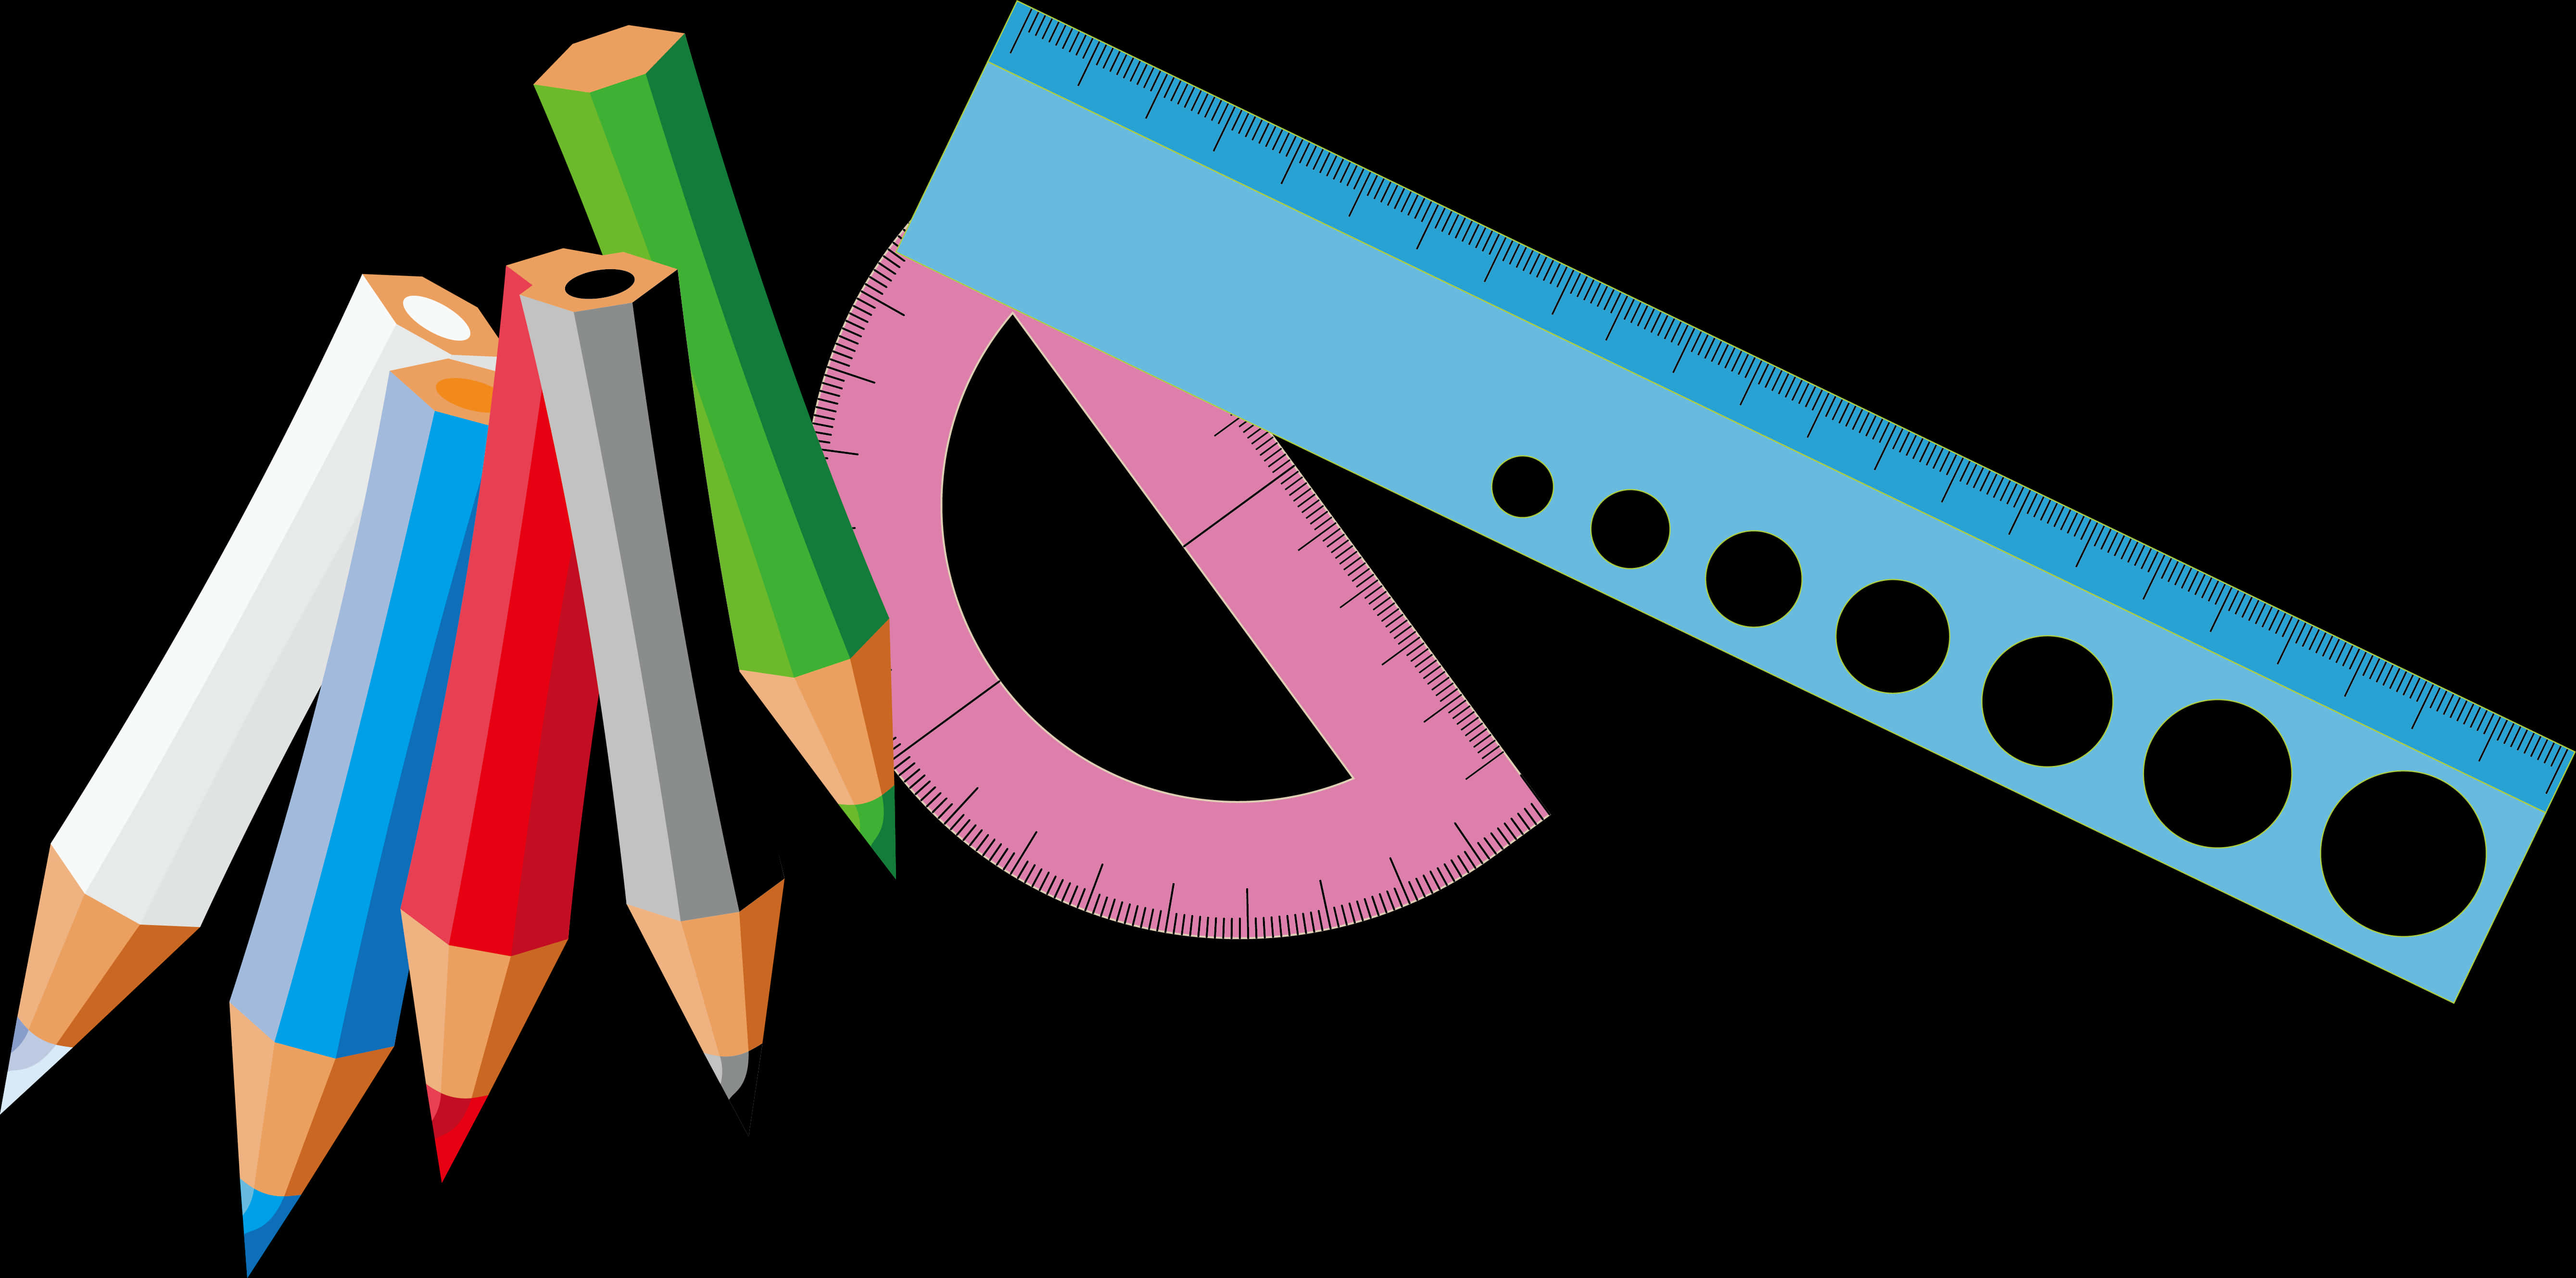 A Drawing Of Pencils And A Ruler